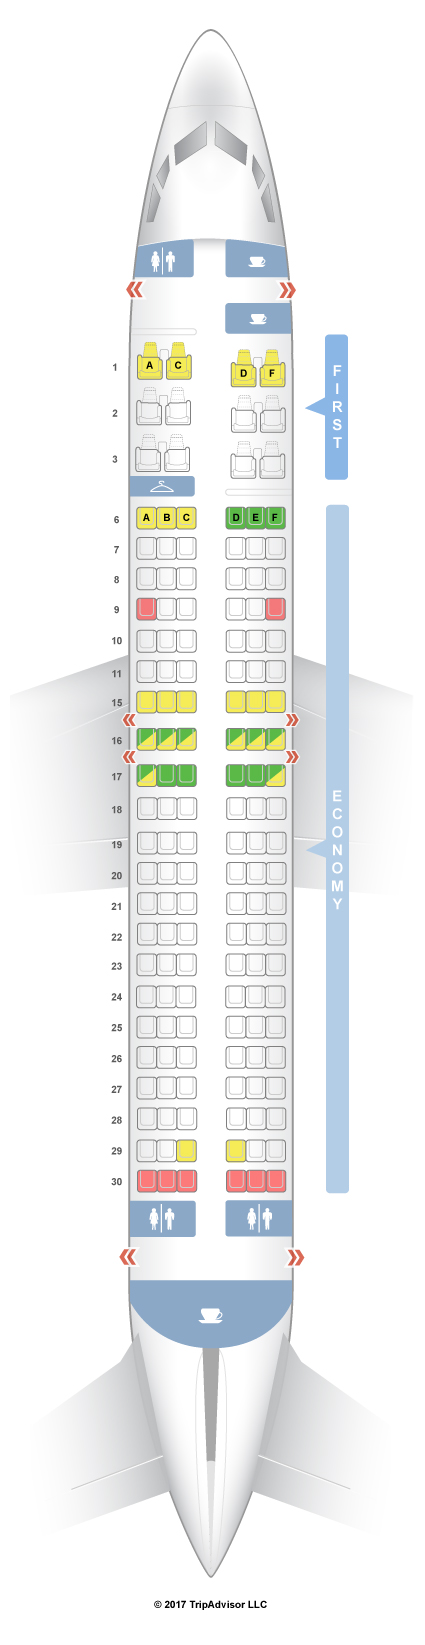 What is the safest seat on a Boeing 737?